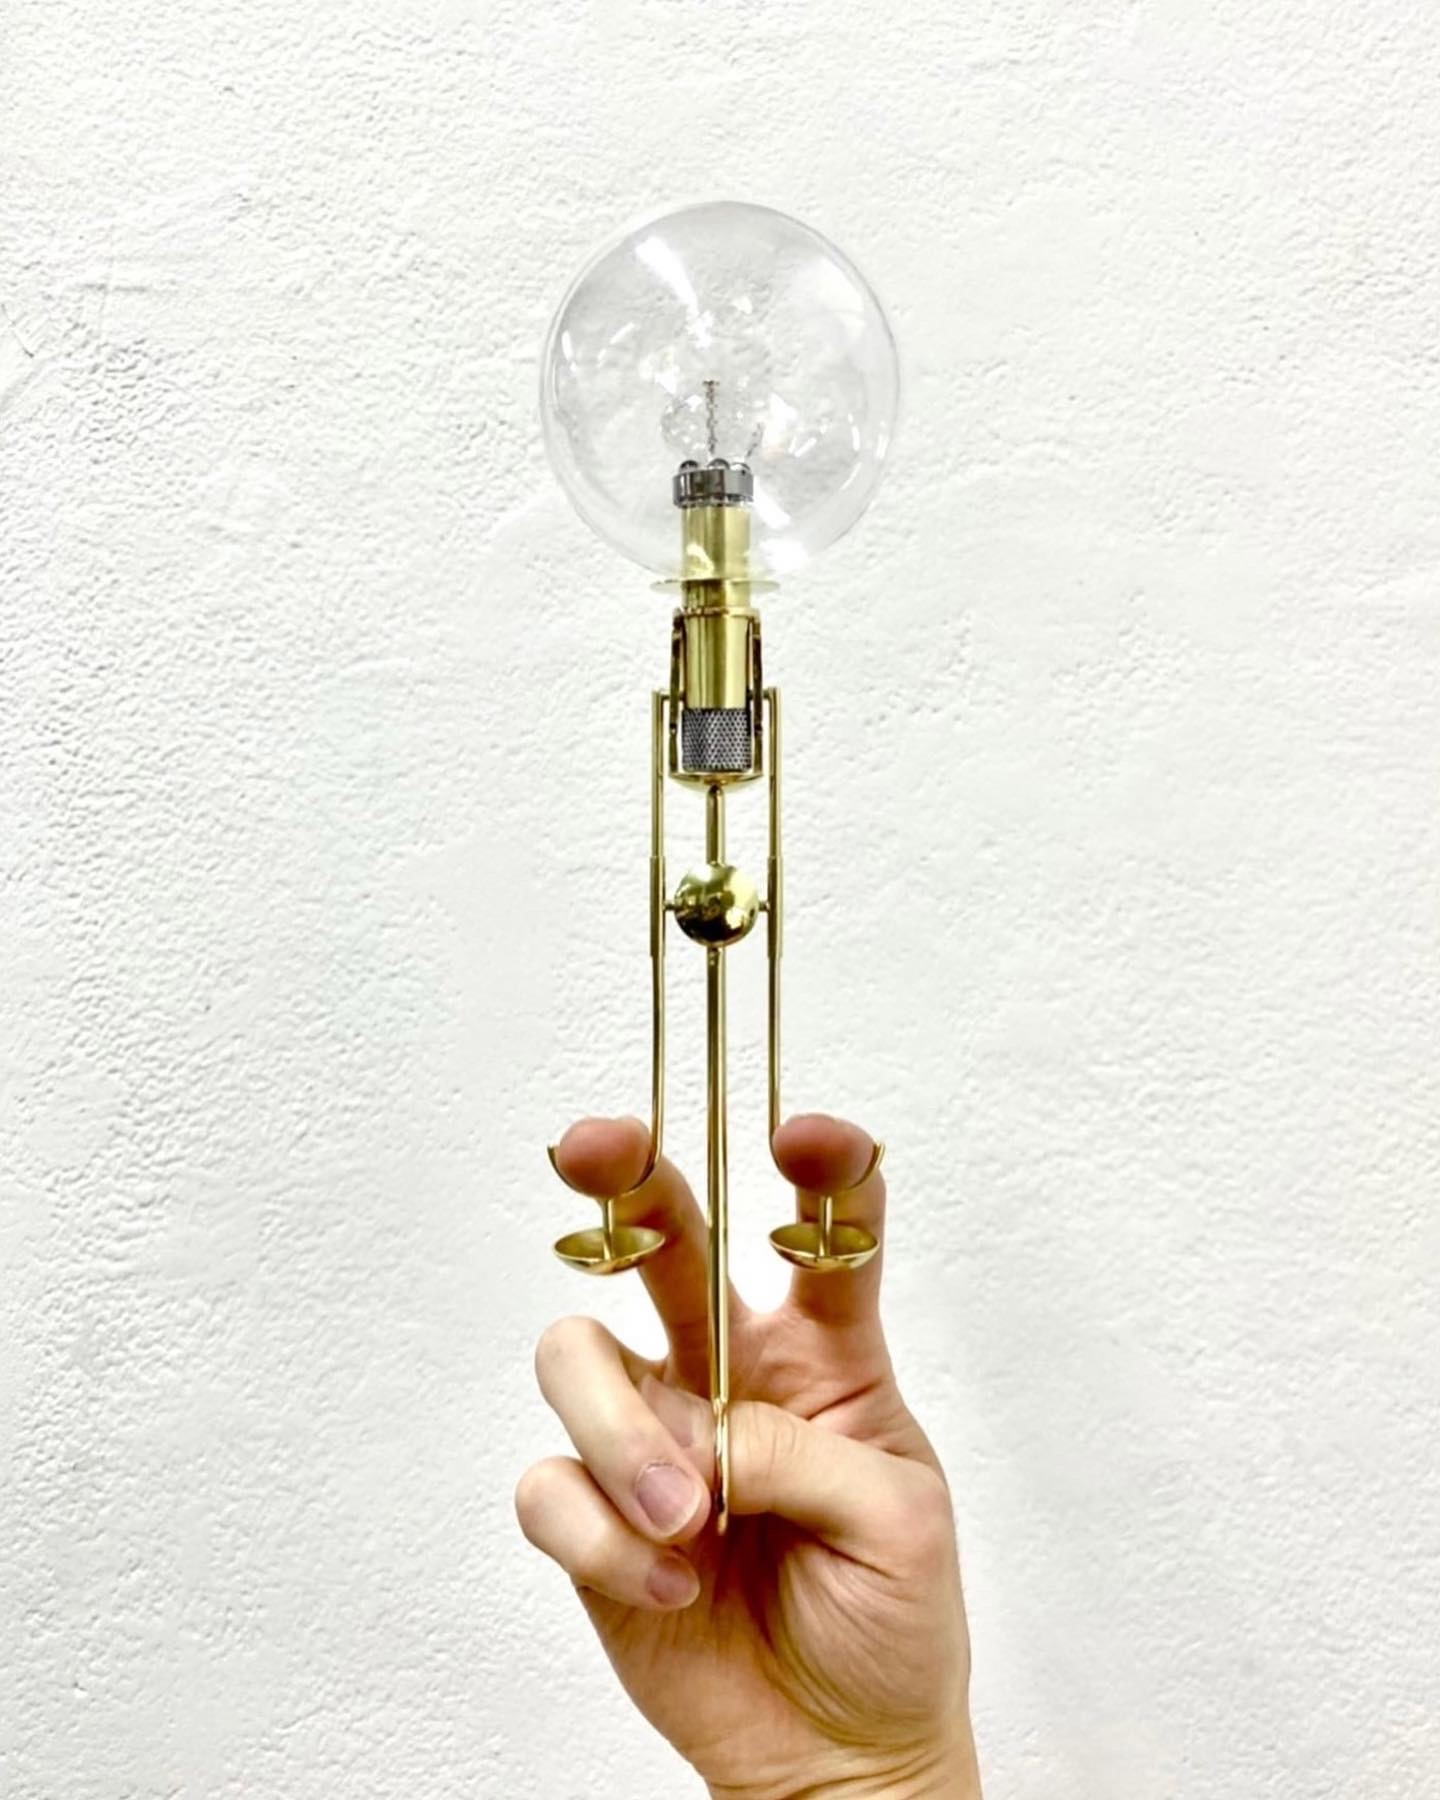 A hand holds gold-colored metal object in front of a white wall. The object has a large circular glass orb encompassing what appears to be either a light filament or an oil wick. This site atop a gold base which comes out of the glass orb and connects to three thin pieces of metal being held by the hand.